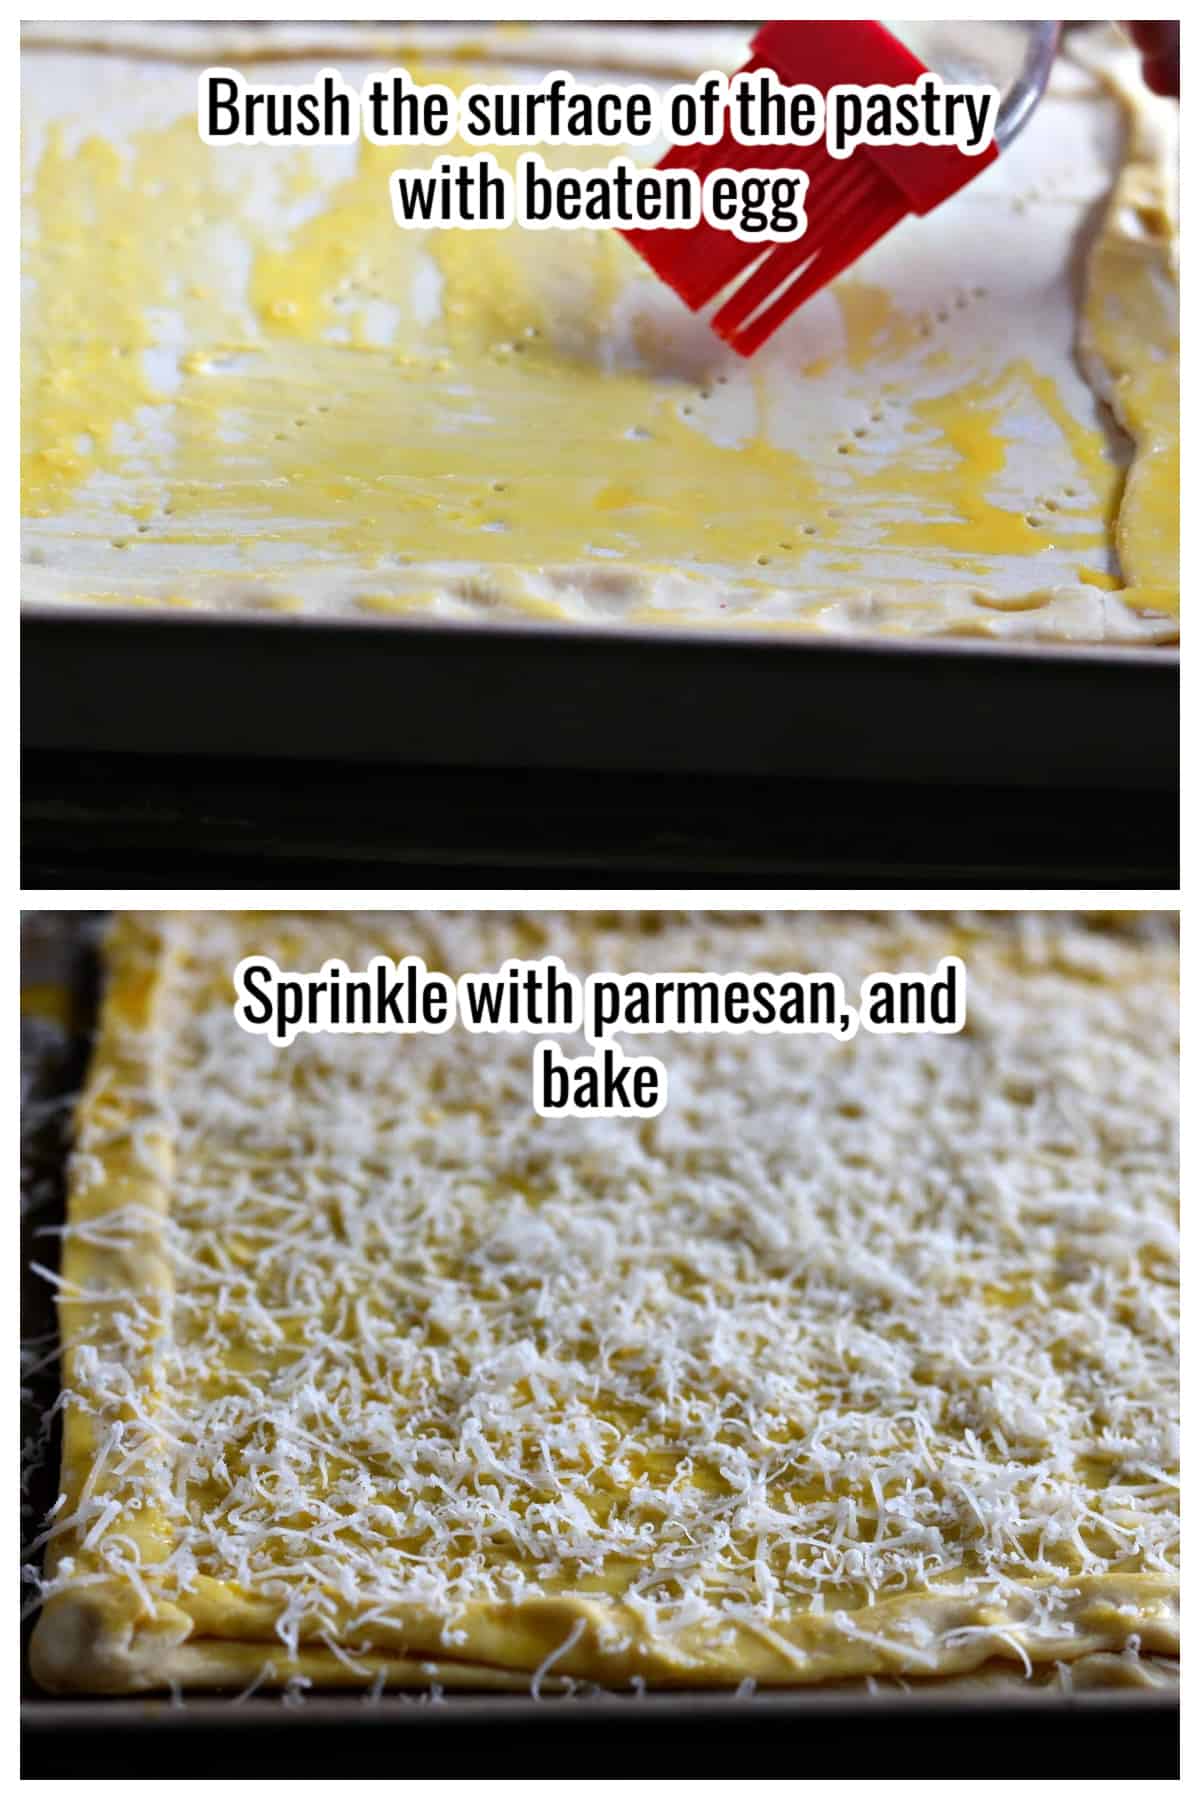 Collage of process of brushing egg and sprinkling parmesan on a puff pastry base.